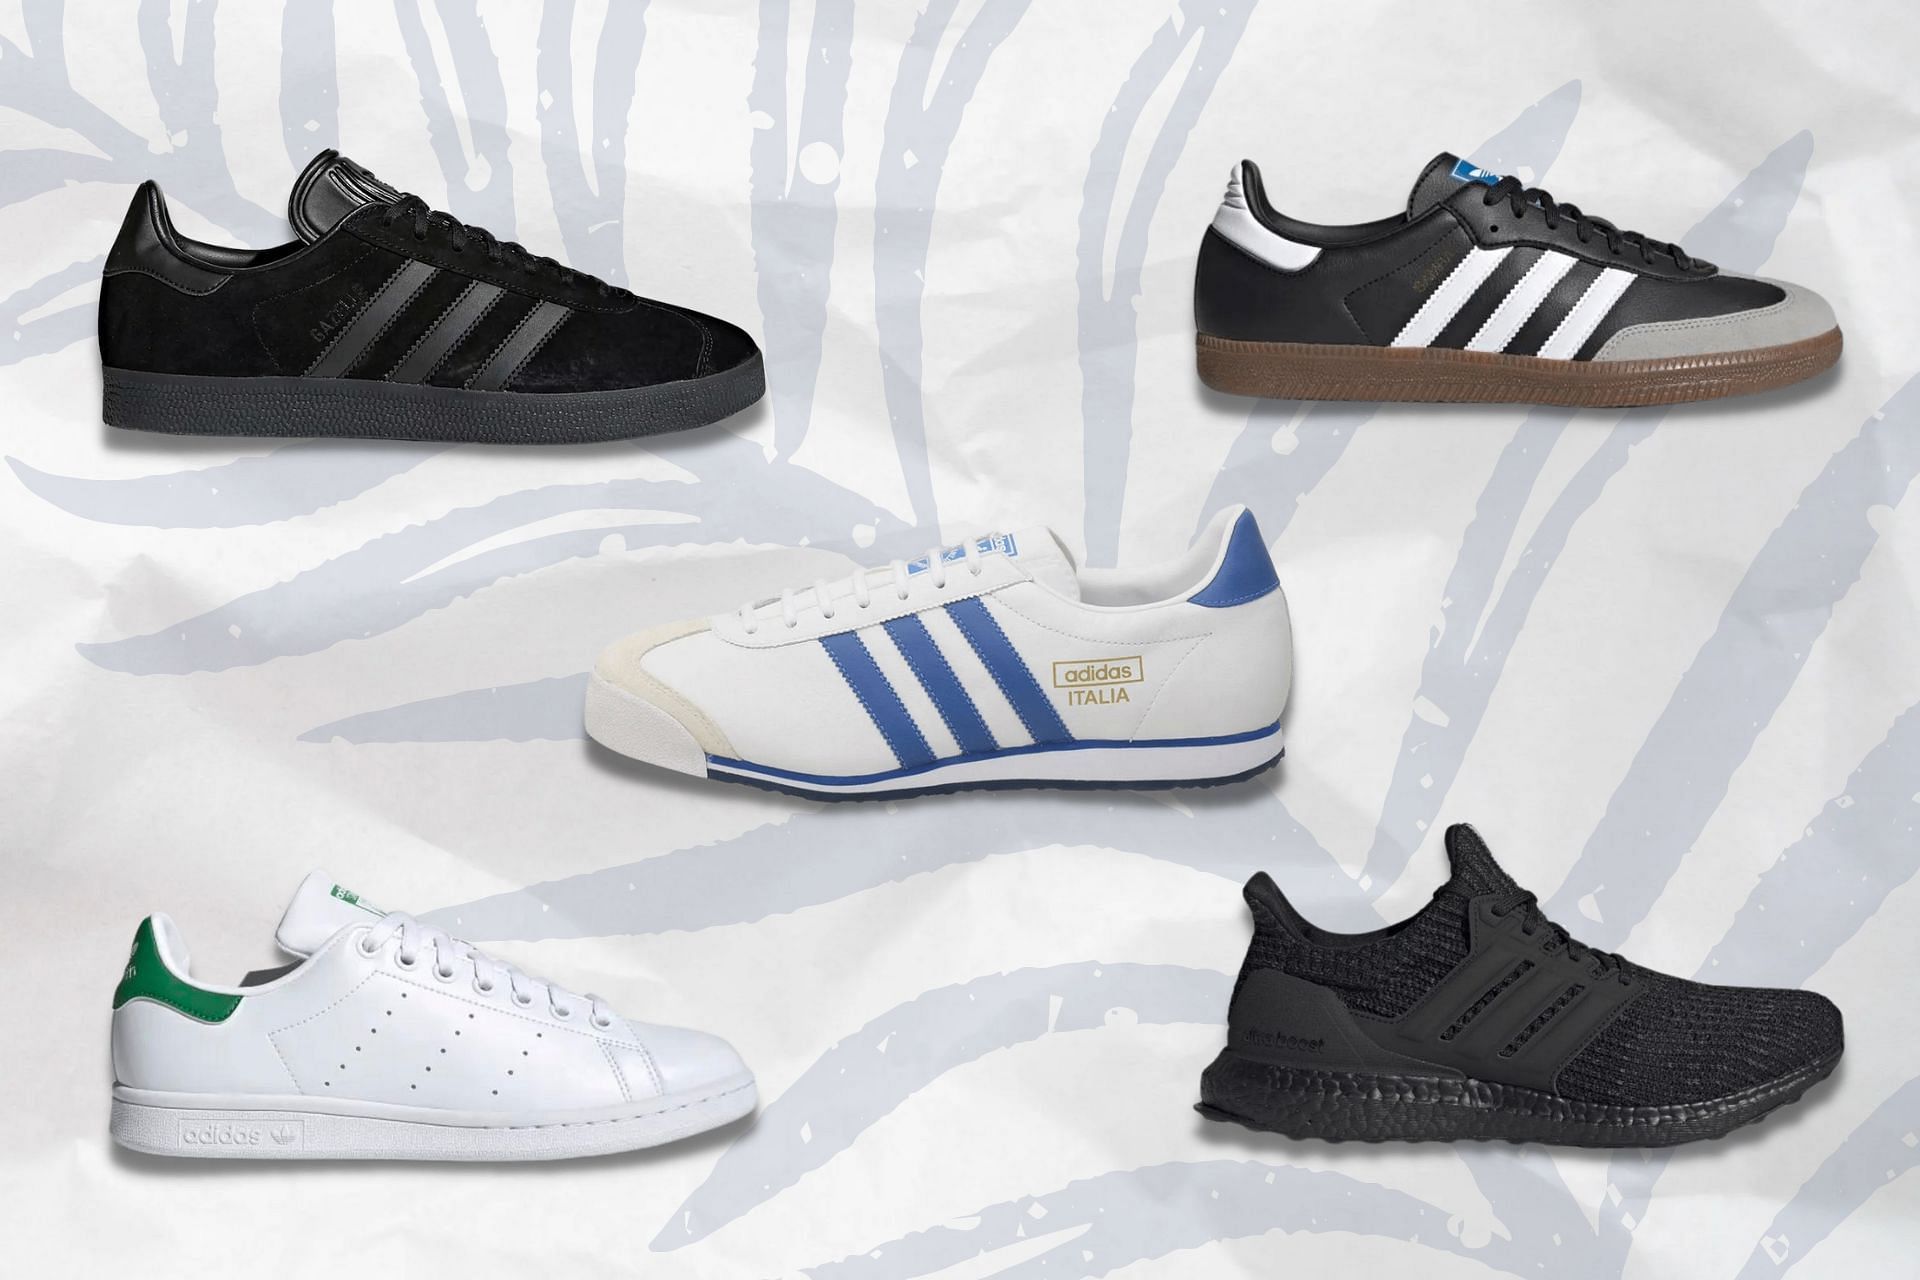 Timeless sneakers by Adidas that have created history in the sneaker world (via sportskeeda)